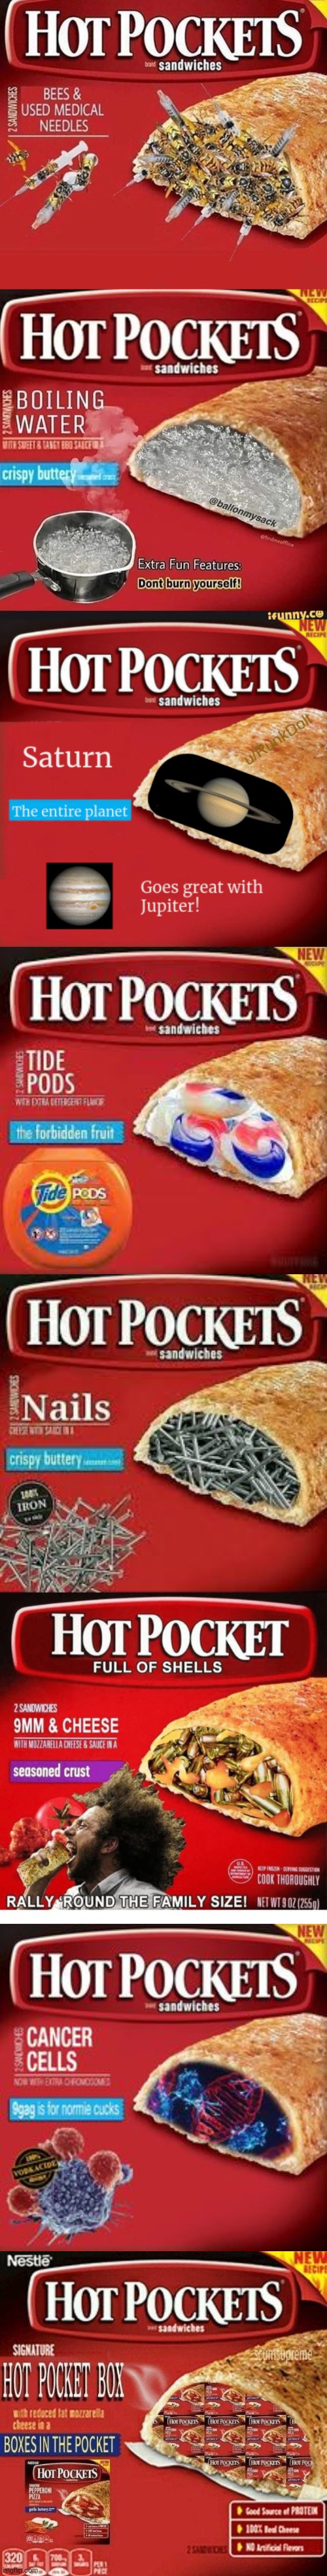 Image tagged in hot pockets - Imgflip